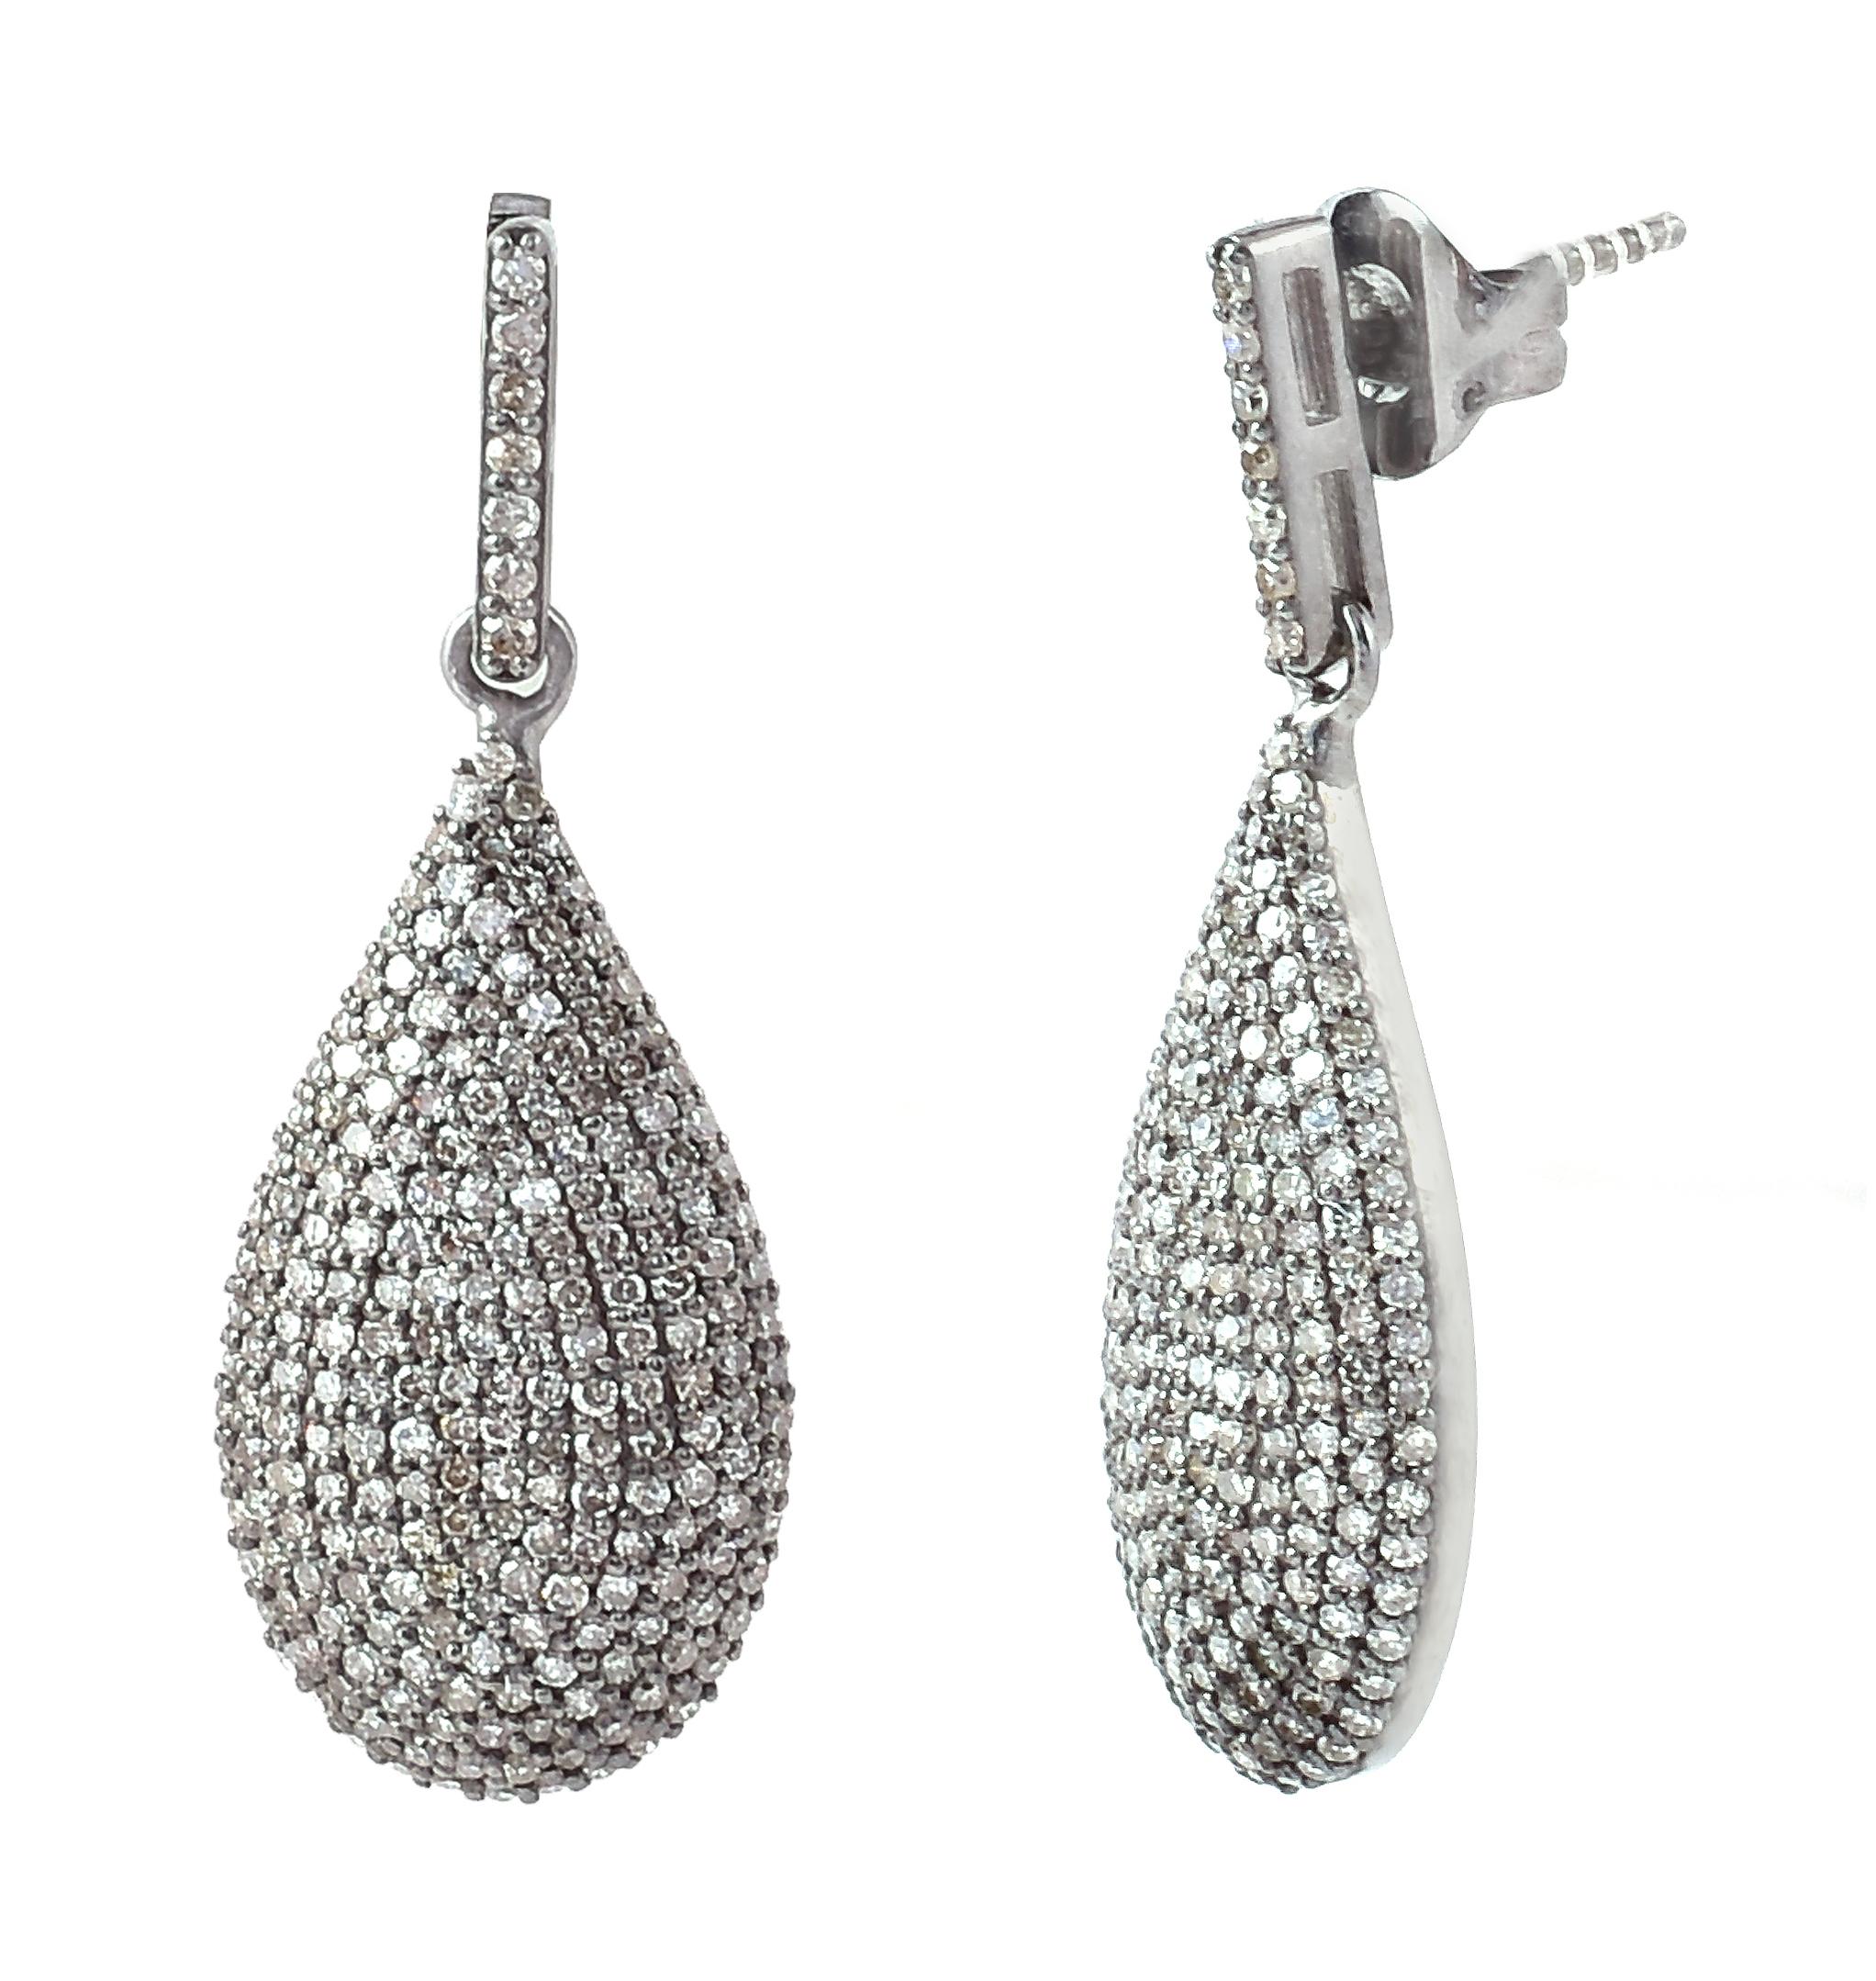 1.94 Carat Diamond Dangle Earrings in Victorian-Style

This Victorian art-deco style diamond pave set hanging earring is exquisite. The bottom pear drop is magically formed with several pave set diamond rows gradually increasing from the center